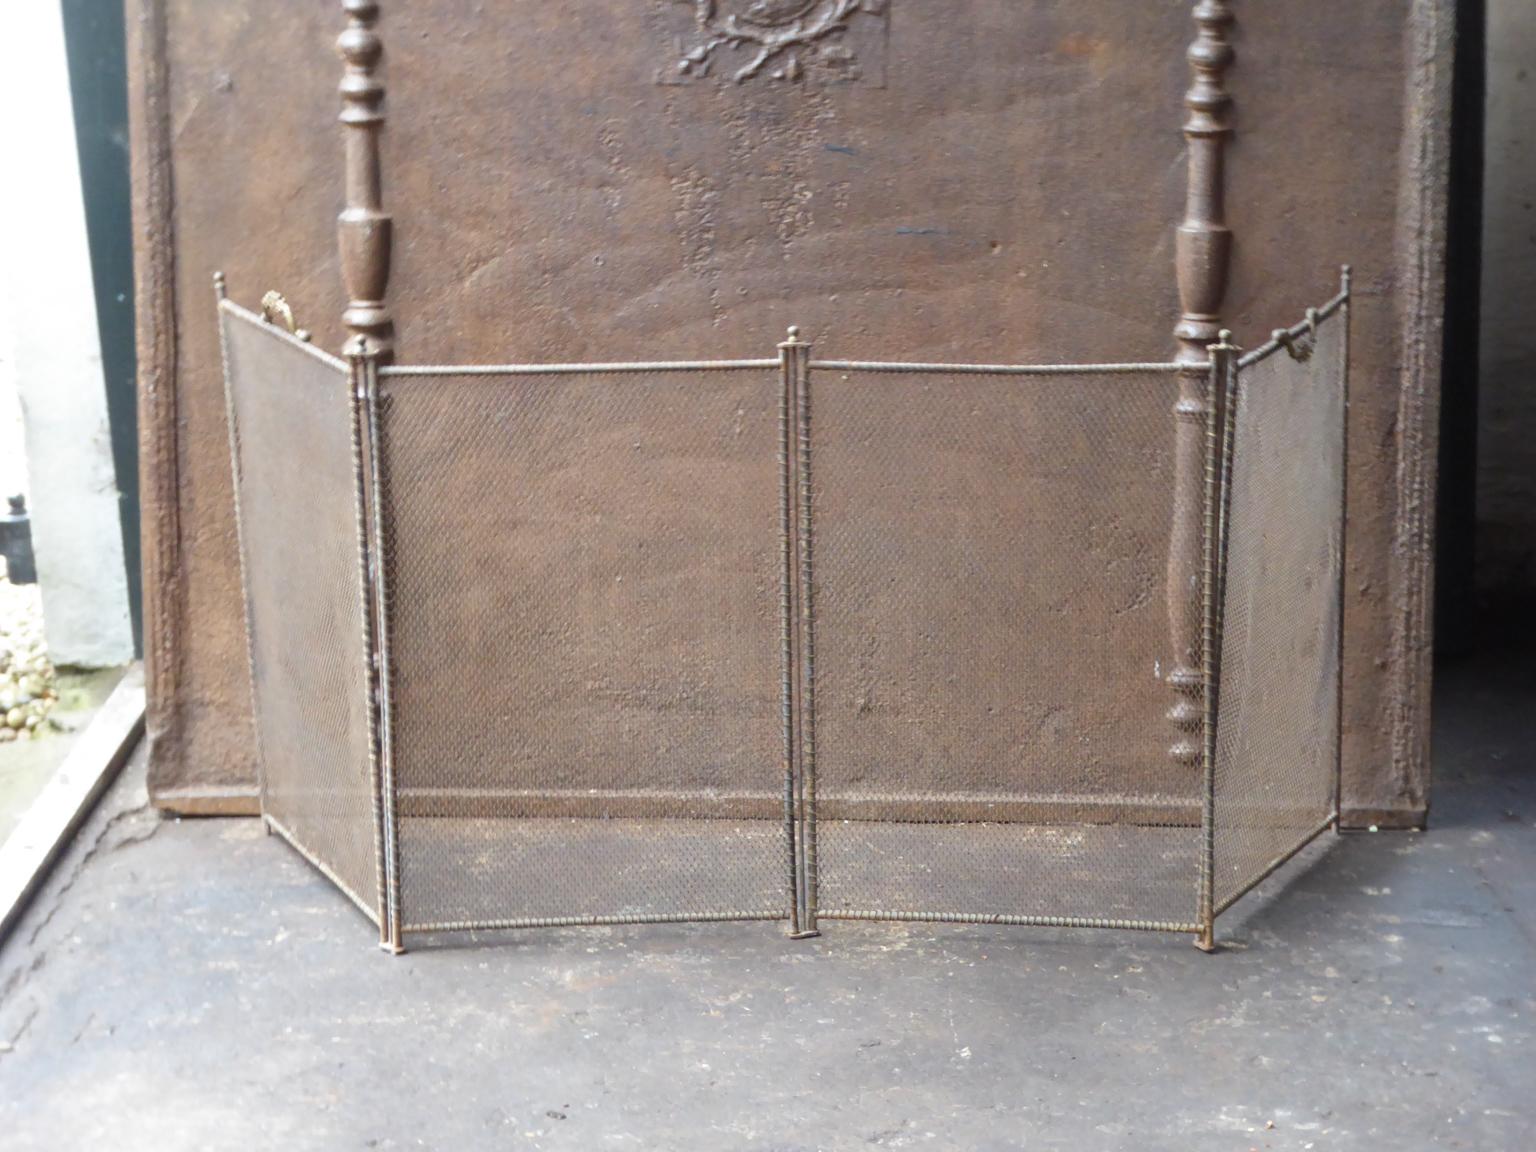 19th century French Napoleon III four-panel fireplace screen. The screen is made of brass, iron and iron mesh. It is in a good condition and is fit for use in front of the fireplace.